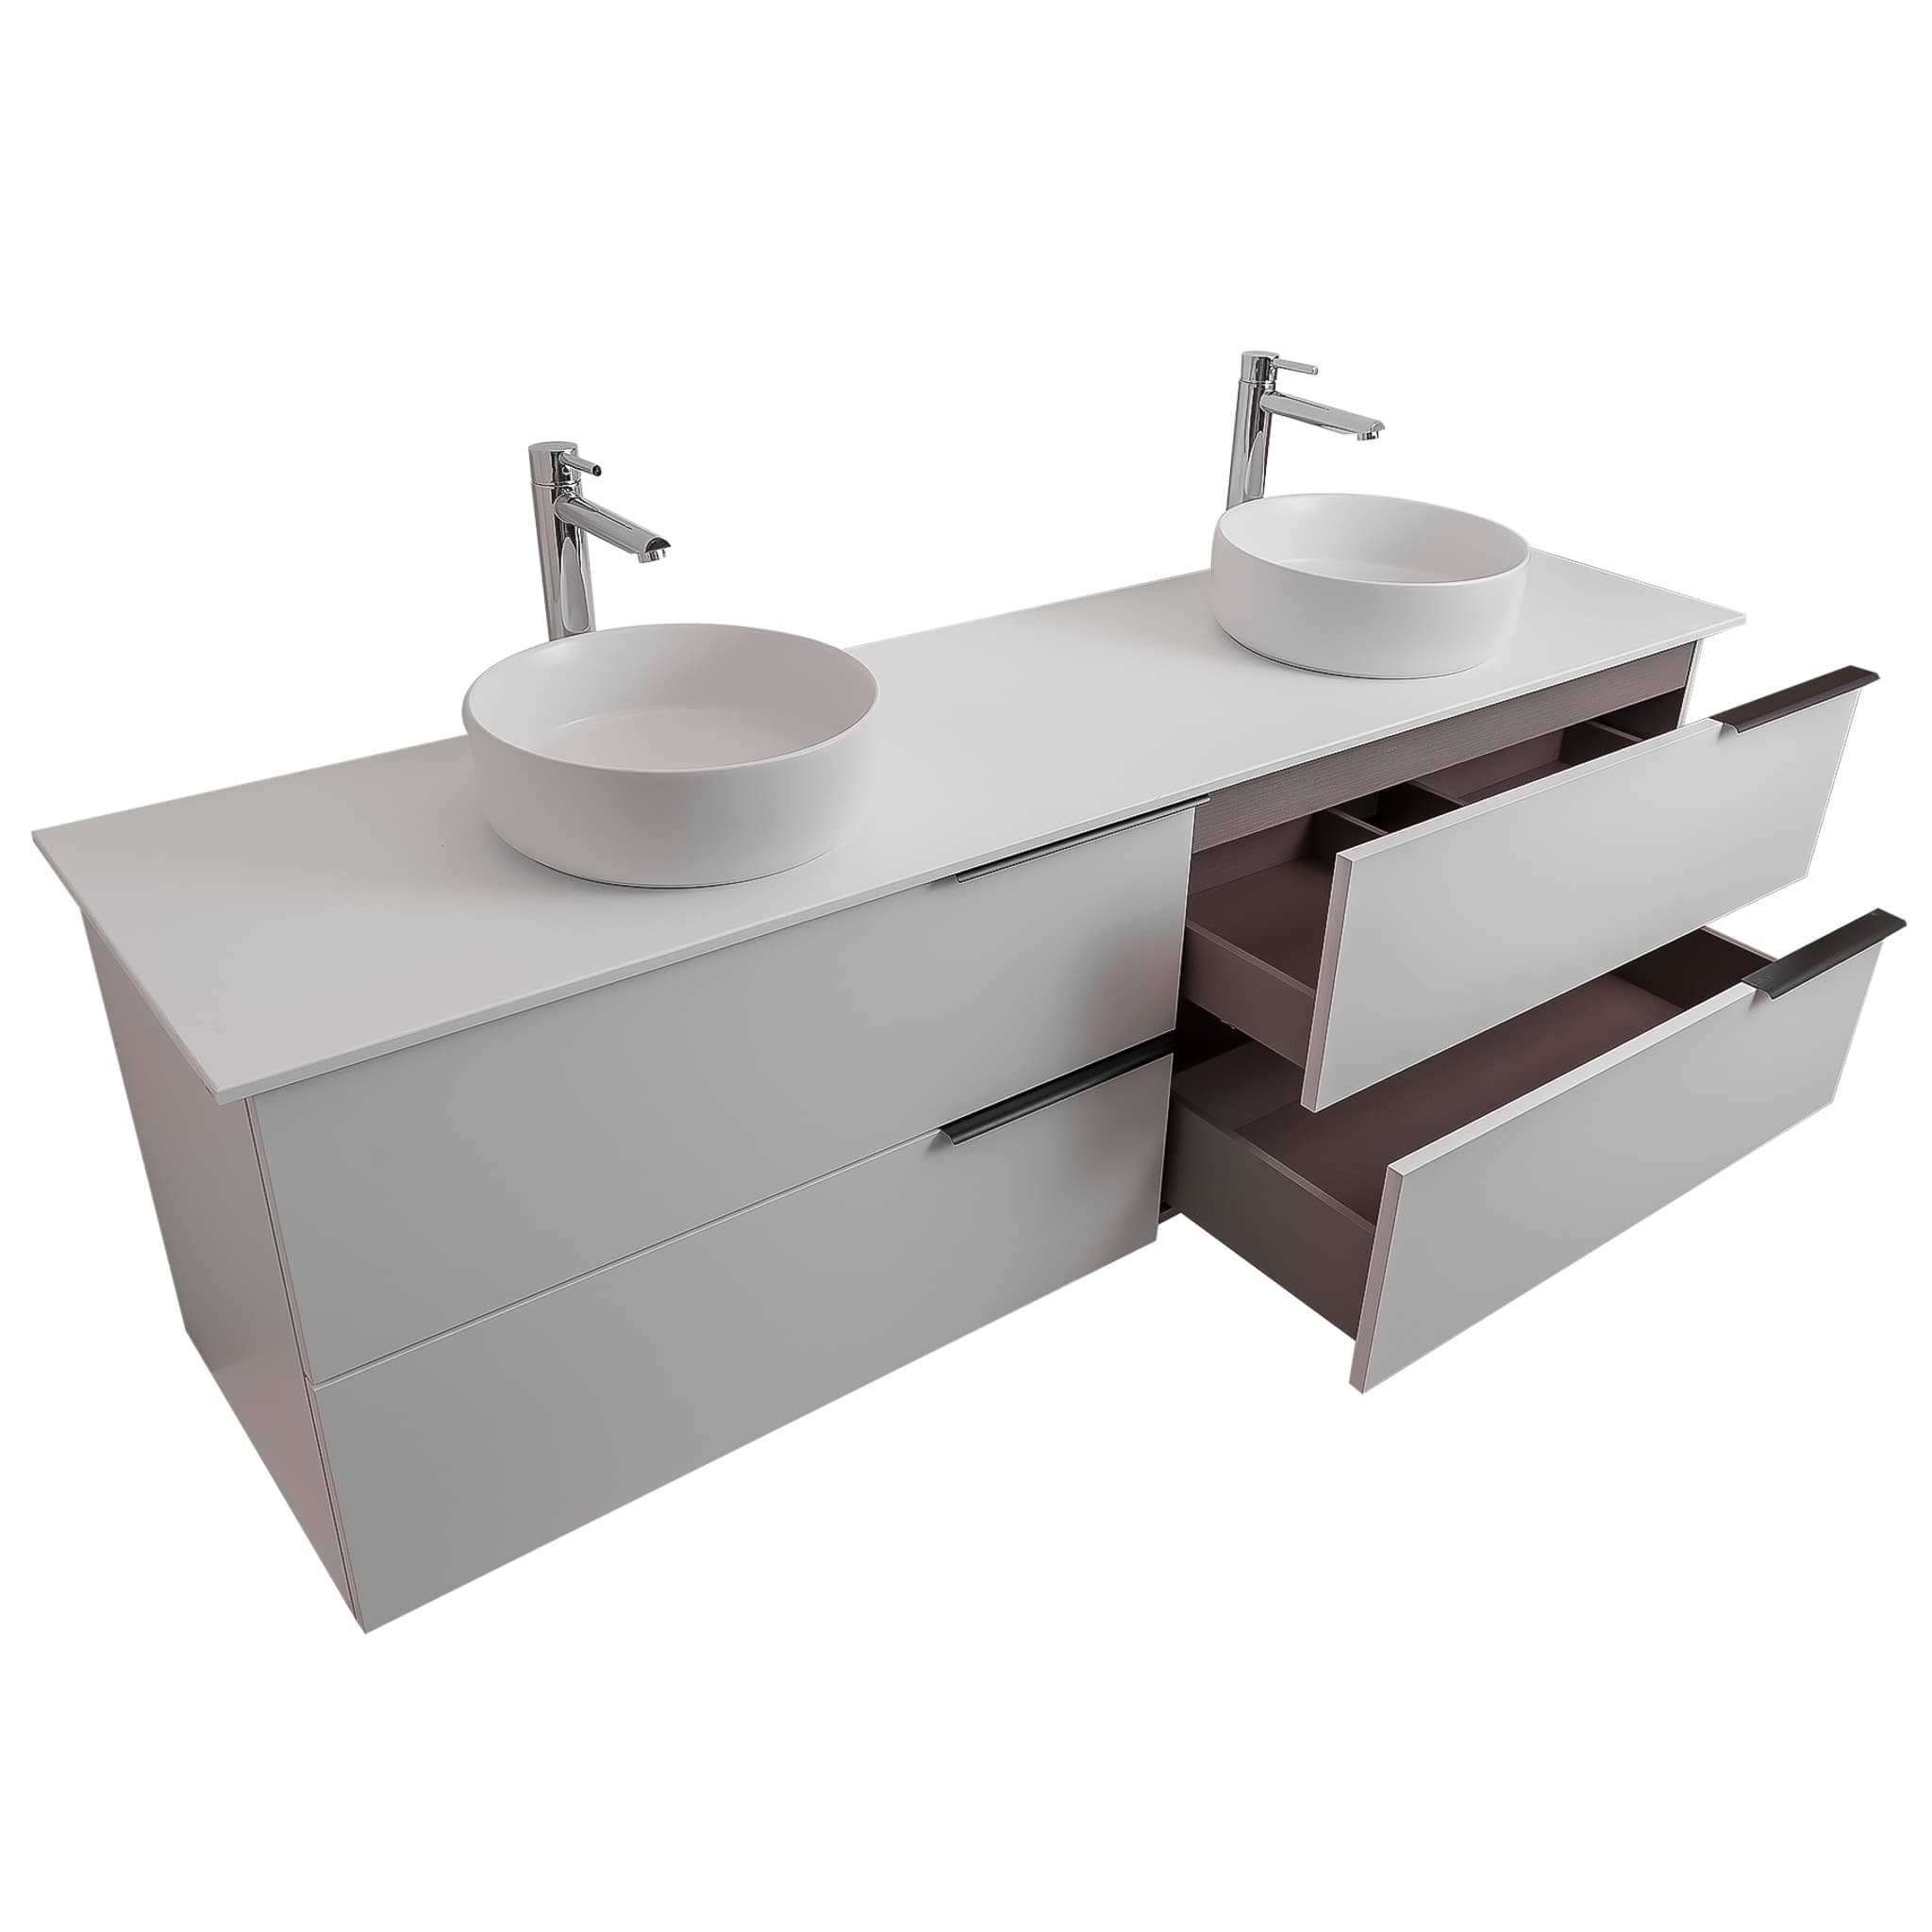 Mallorca 63 Matte White Cabinet, Ares White Top And Two Ares White Ceramic Basin, Wall Mounted Modern Vanity Set